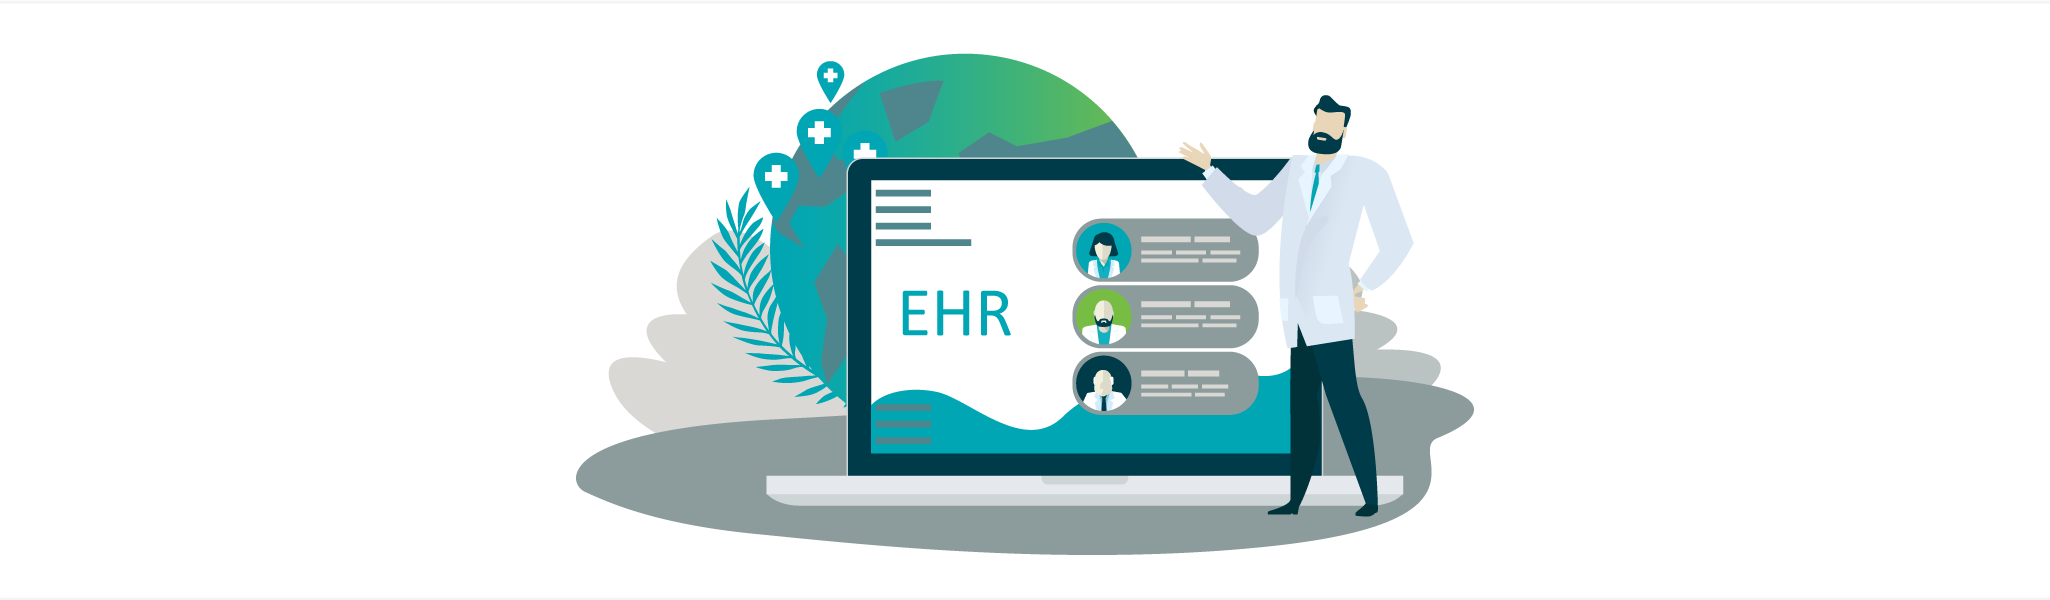 Top 5 Must-Have EHR Features For Glaucoma Specialists